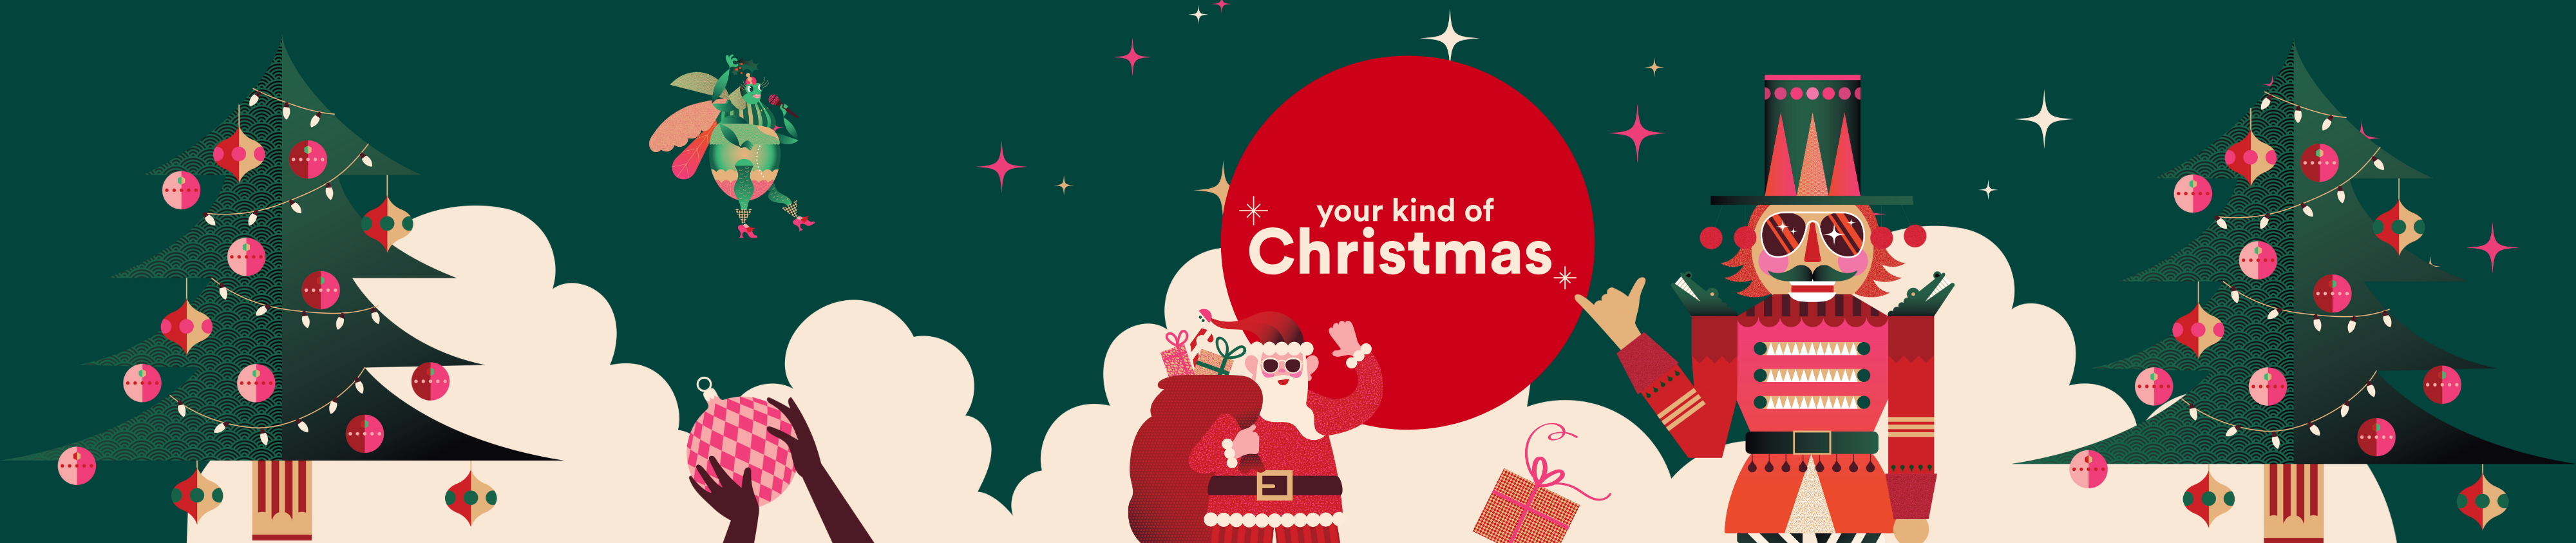 Christmas Home Page Banner - 4000x843.png